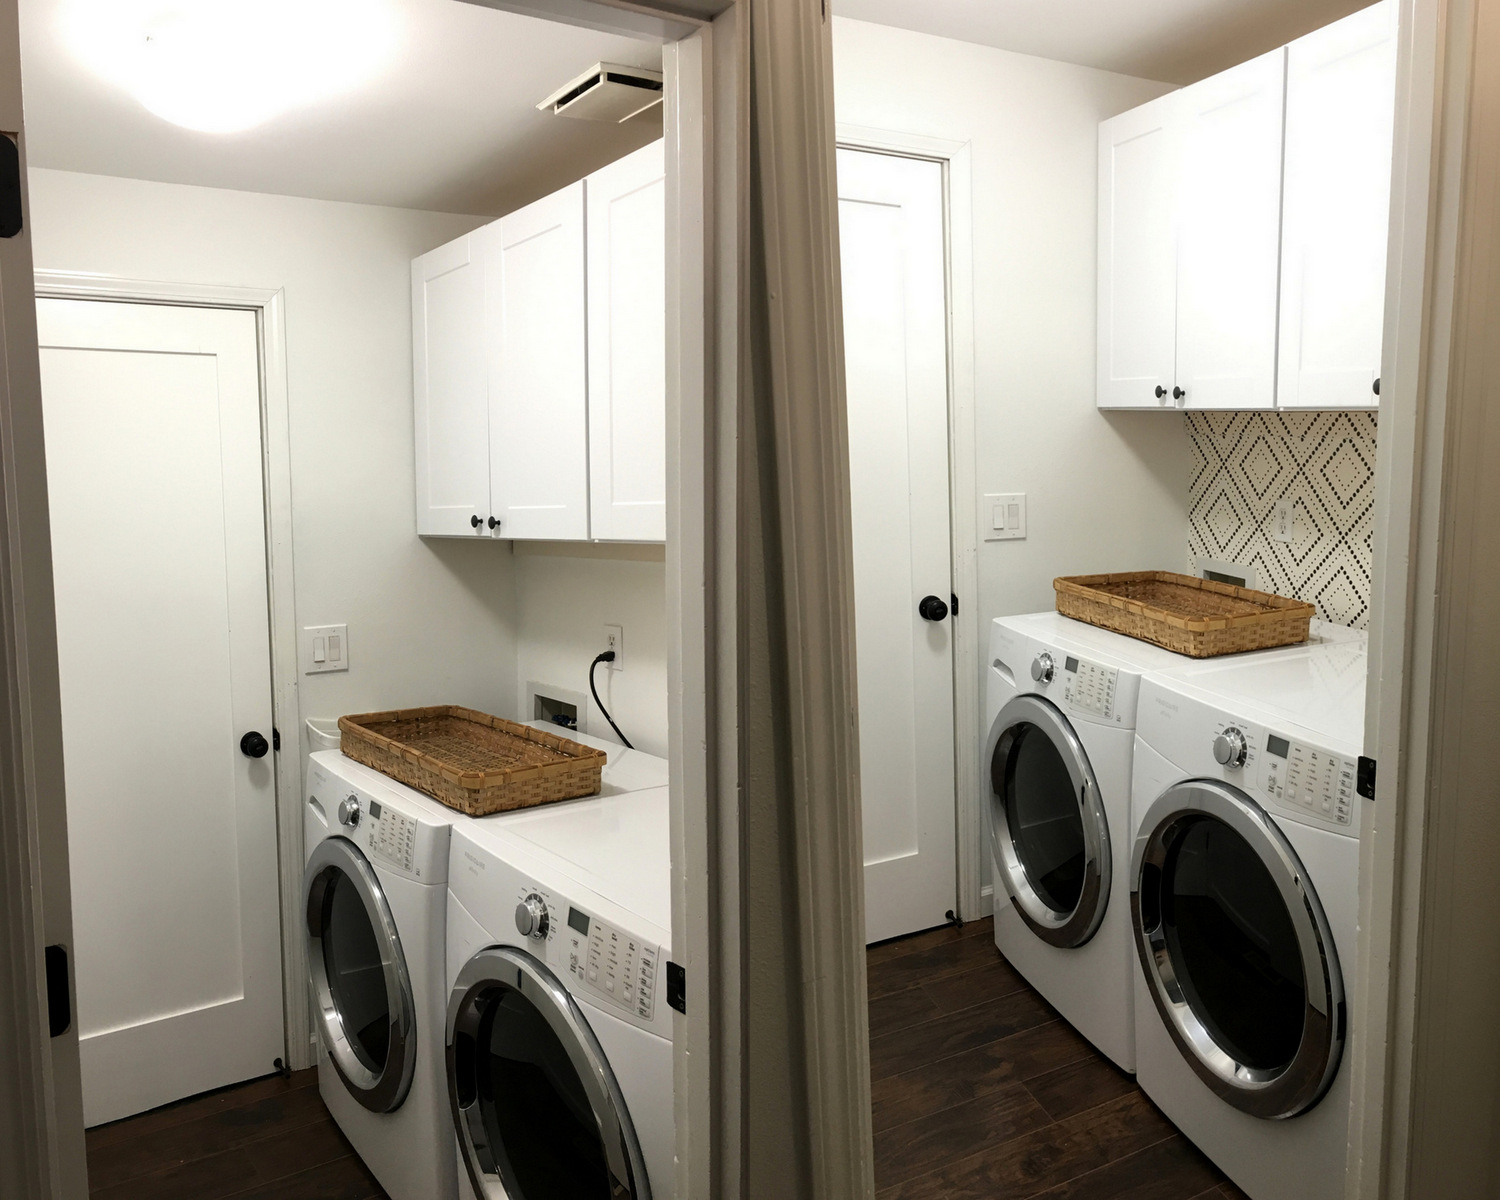 Removable Wallpaper Laundry Room - HD Wallpaper 